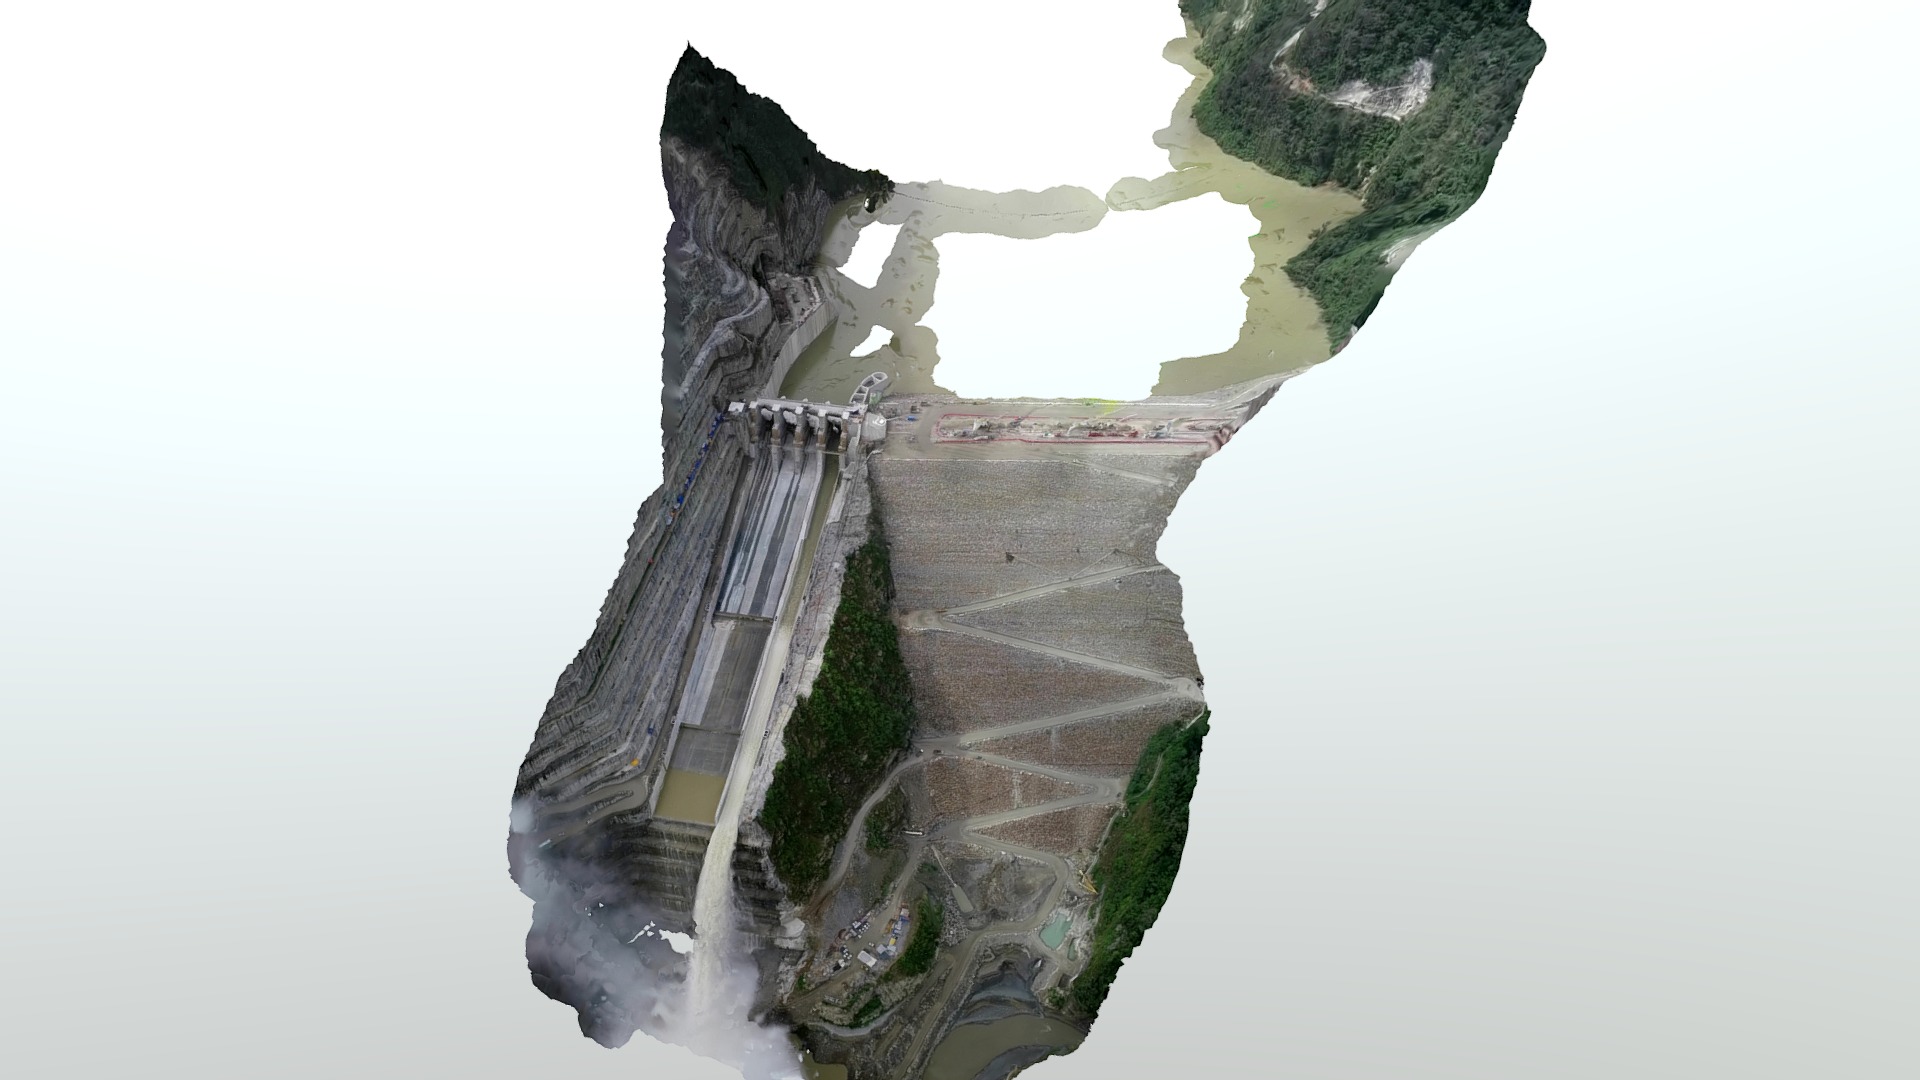 3D model Hidroituango hydroelectric power plant 11042018 - This is a 3D model of the Hidroituango hydroelectric power plant 11042018. The 3D model is about a tall tower with a bridge over it.